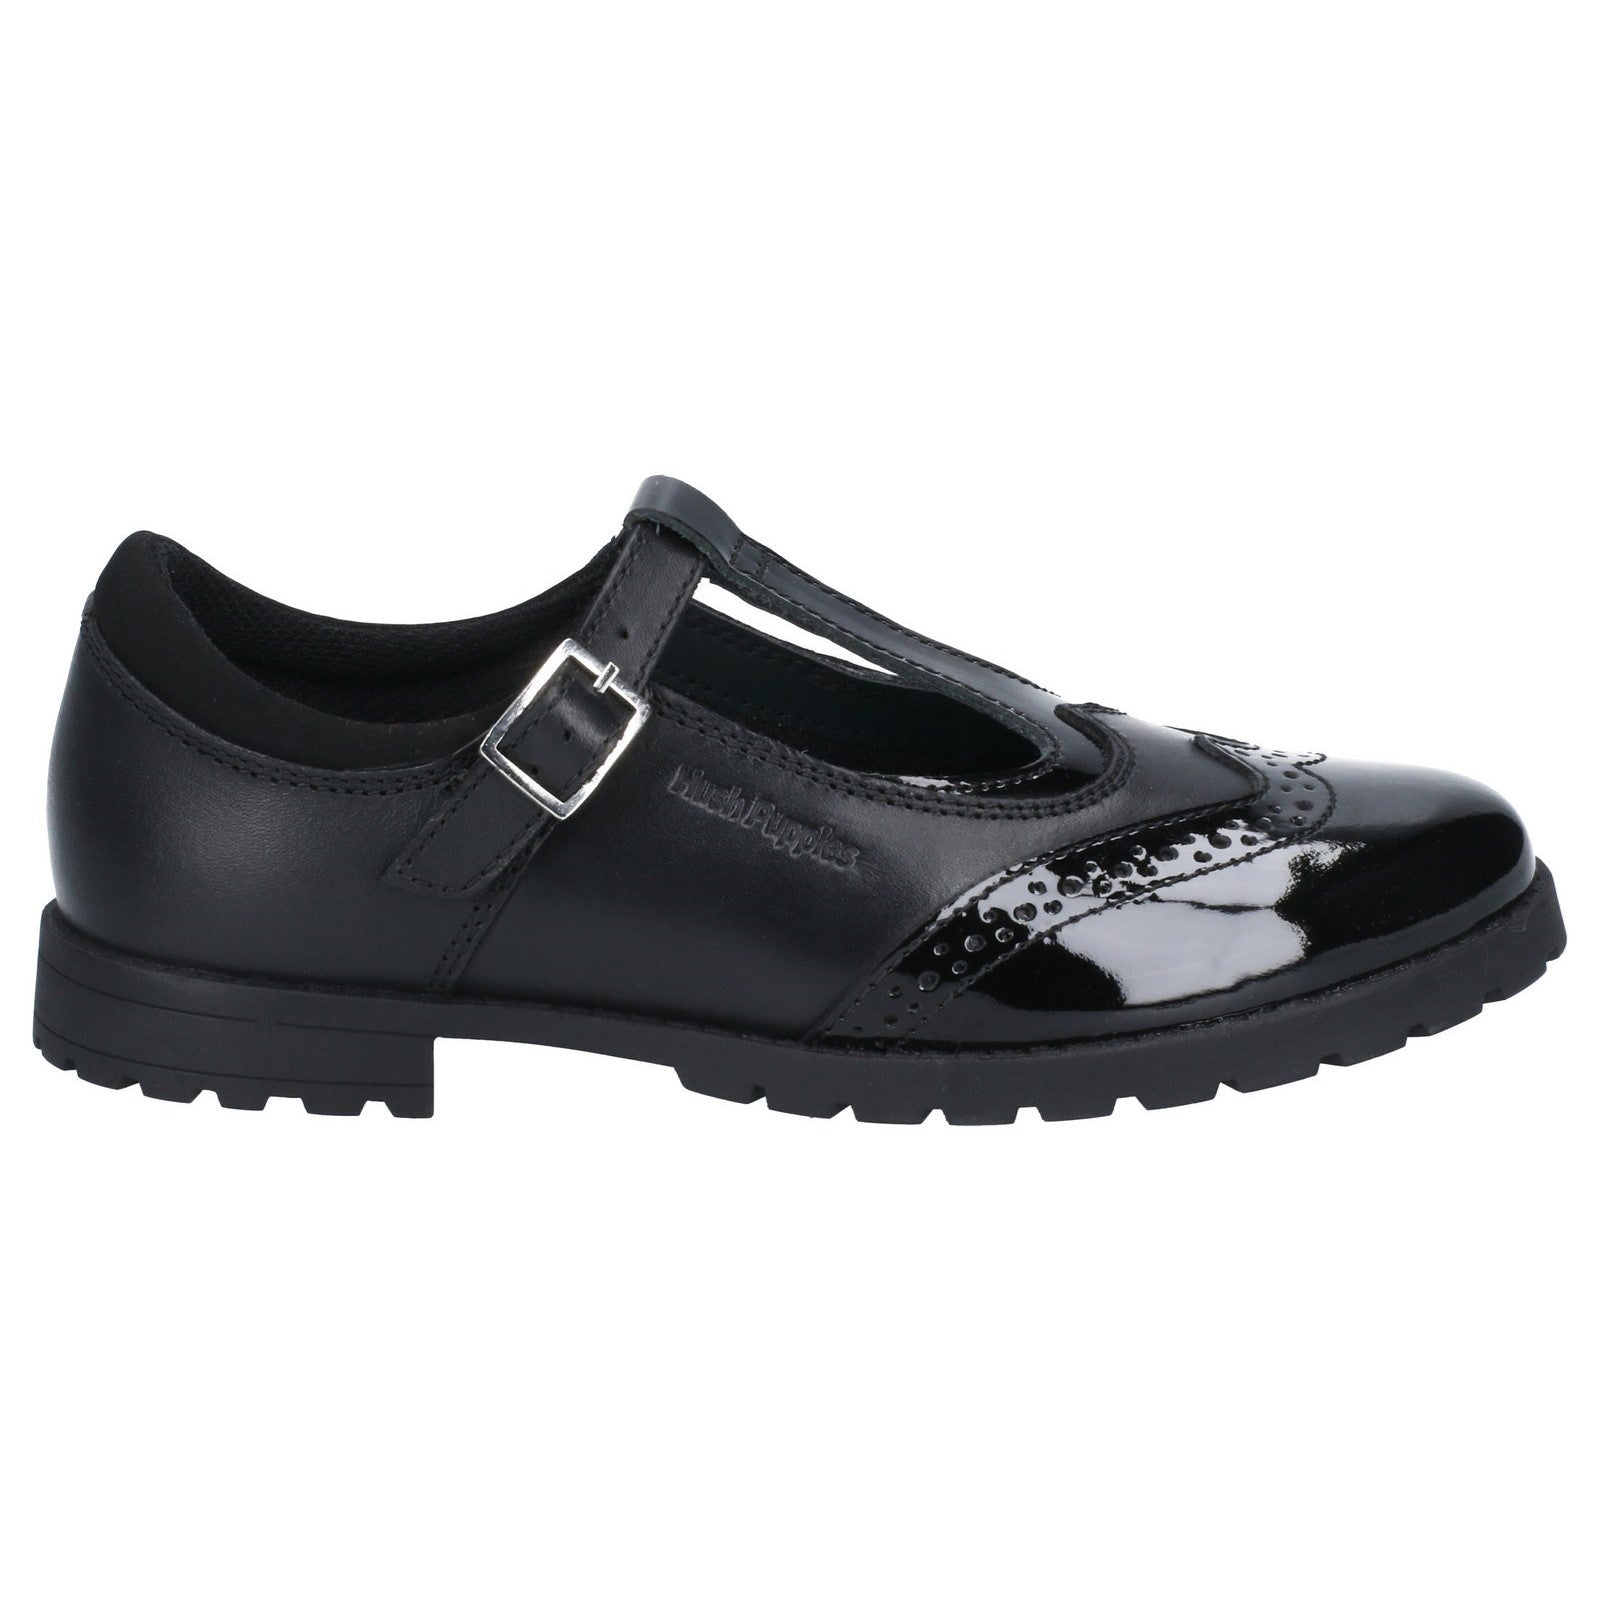 Hush Puppies Girls Maisie Leather School Shoes - Black